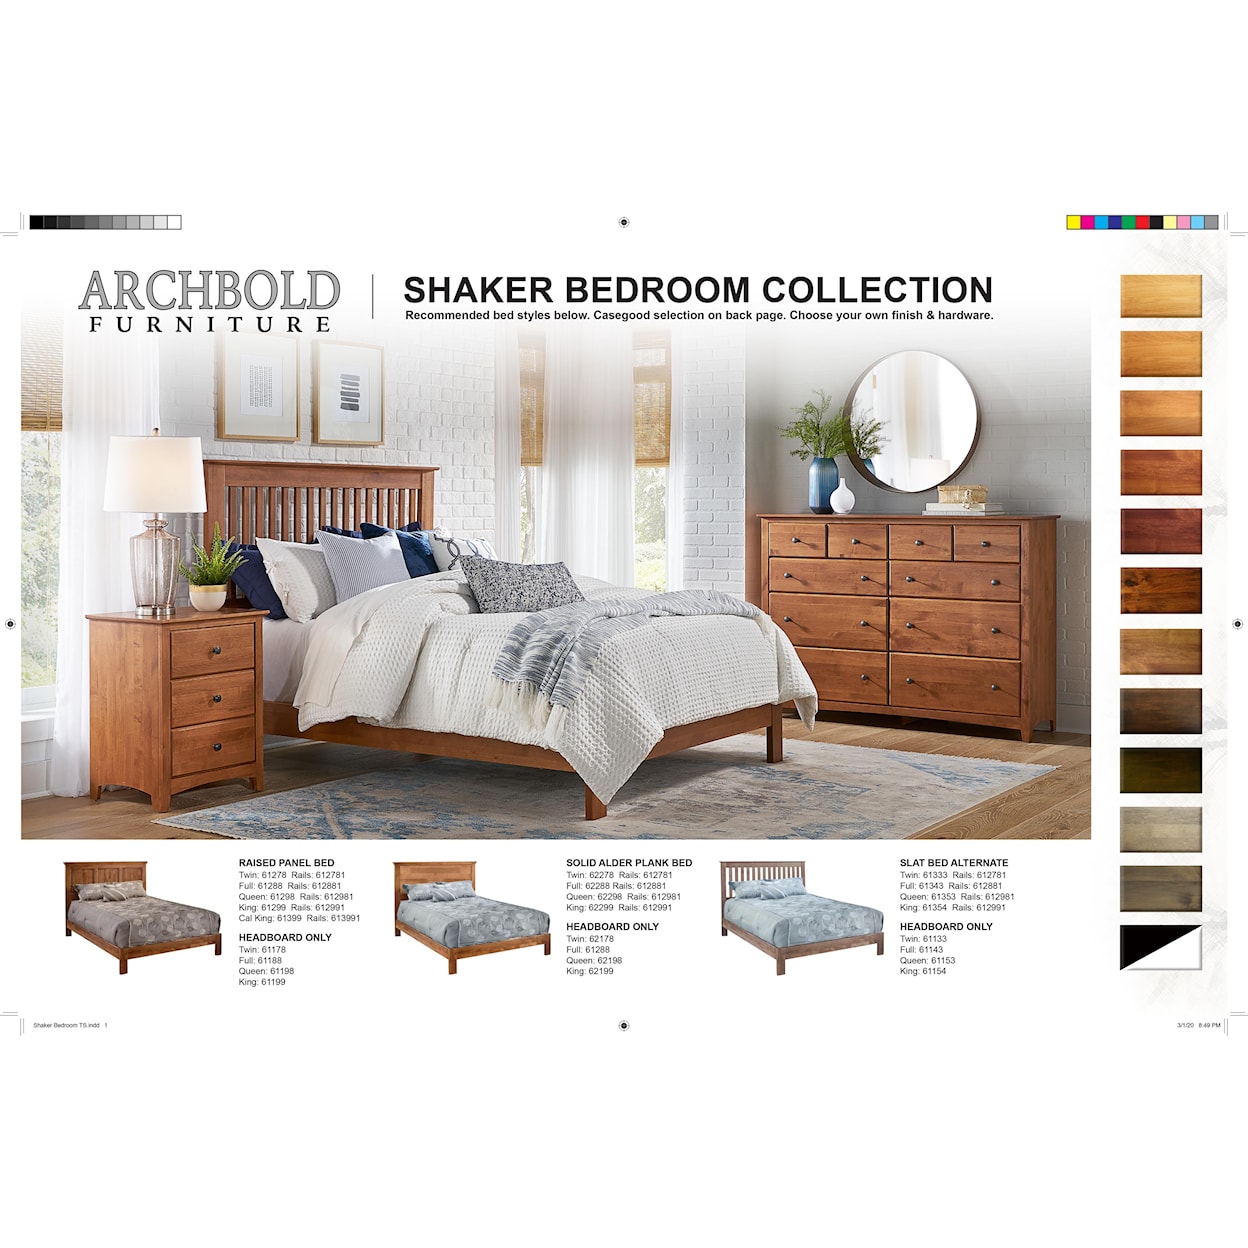 Archbold Furniture DO NOT USE - Shaker Queen Slat Bed